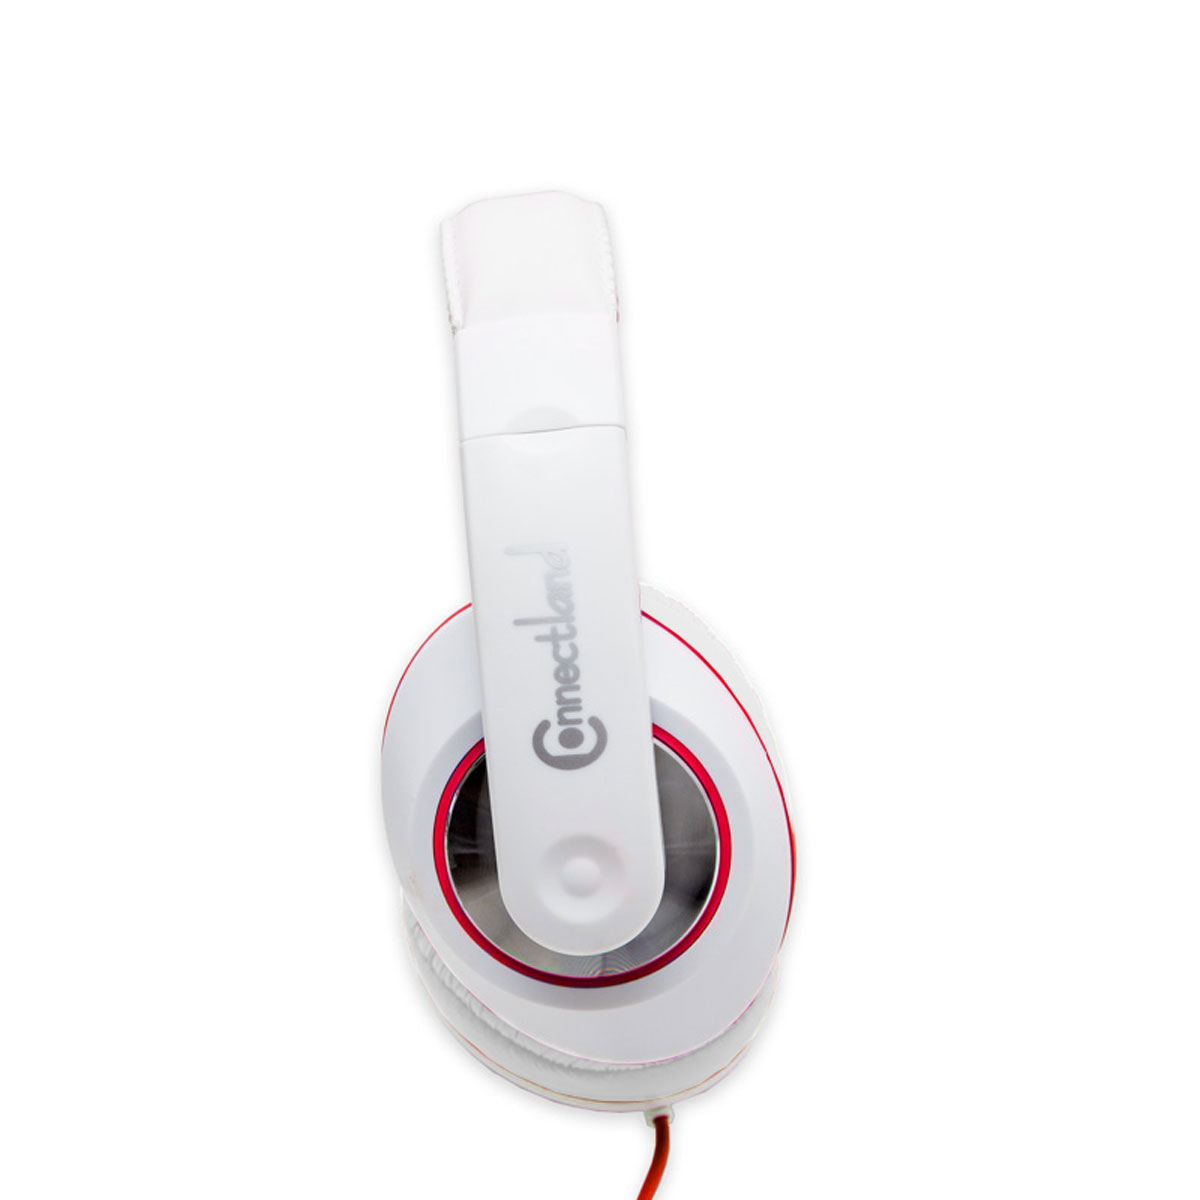 Over The Ear Stereo Kids Mobile Wired Headphone with in-Line Microphone Headphone White Red - image 2 of 3